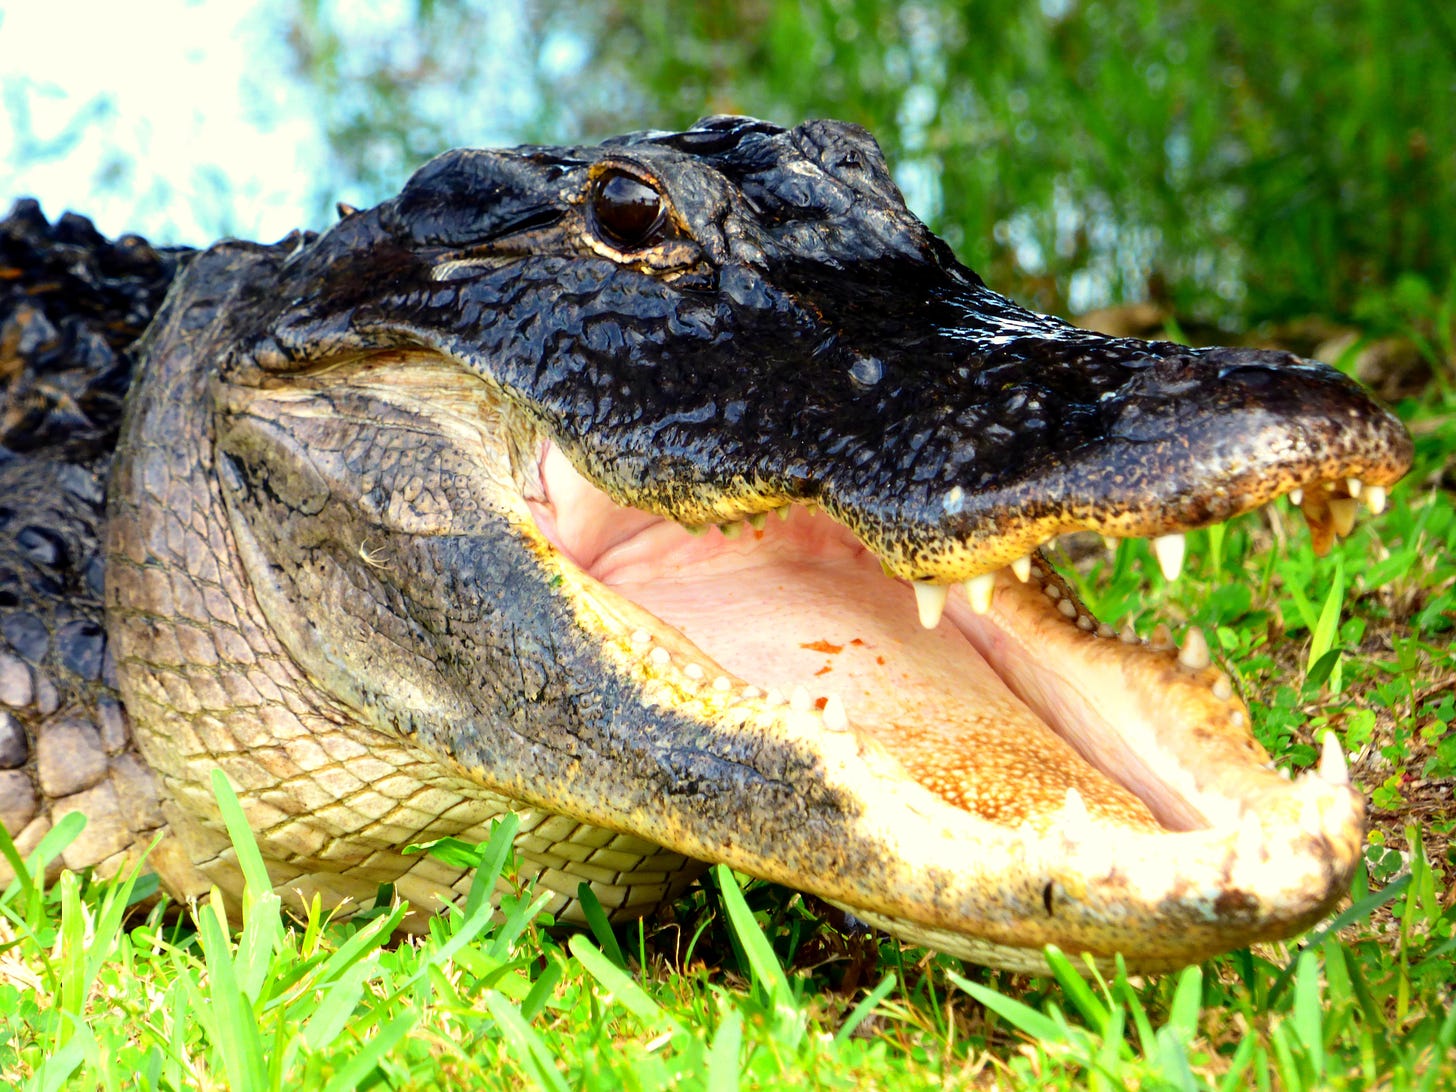 An American alligator with its mouth open as if just finishing a joke and awaiting a reaction